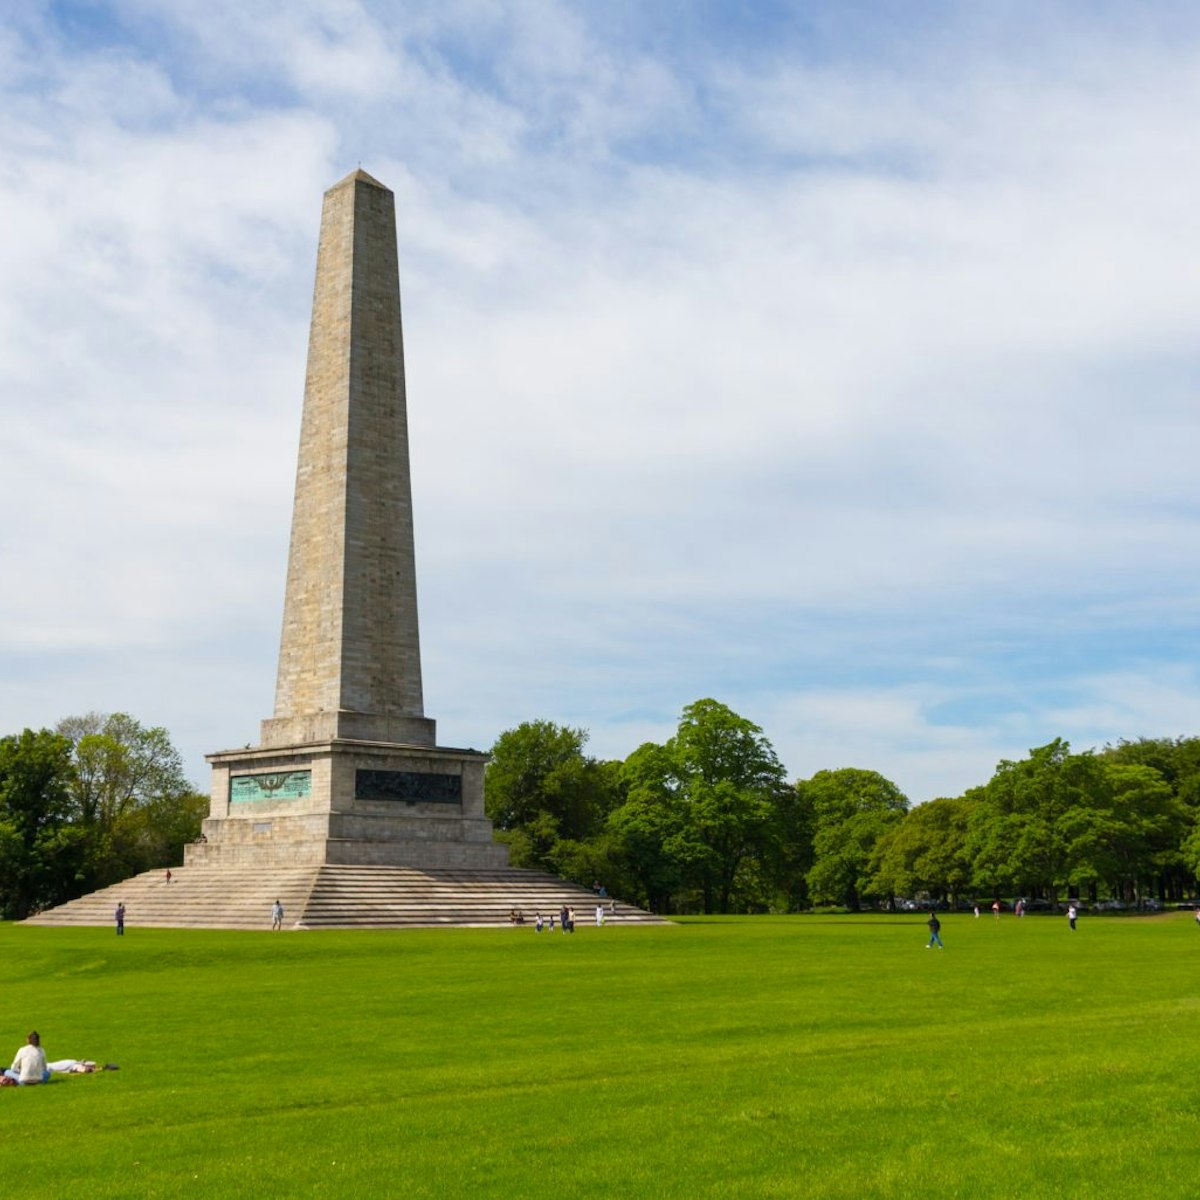 DUBLIN, IRELAND - MAY 17, 2014: The Wellington Monument is an obelisk located in the Phoenix Park. The monument is 62 metres (203 ft) tall and it is the largest obelisk in Europe.